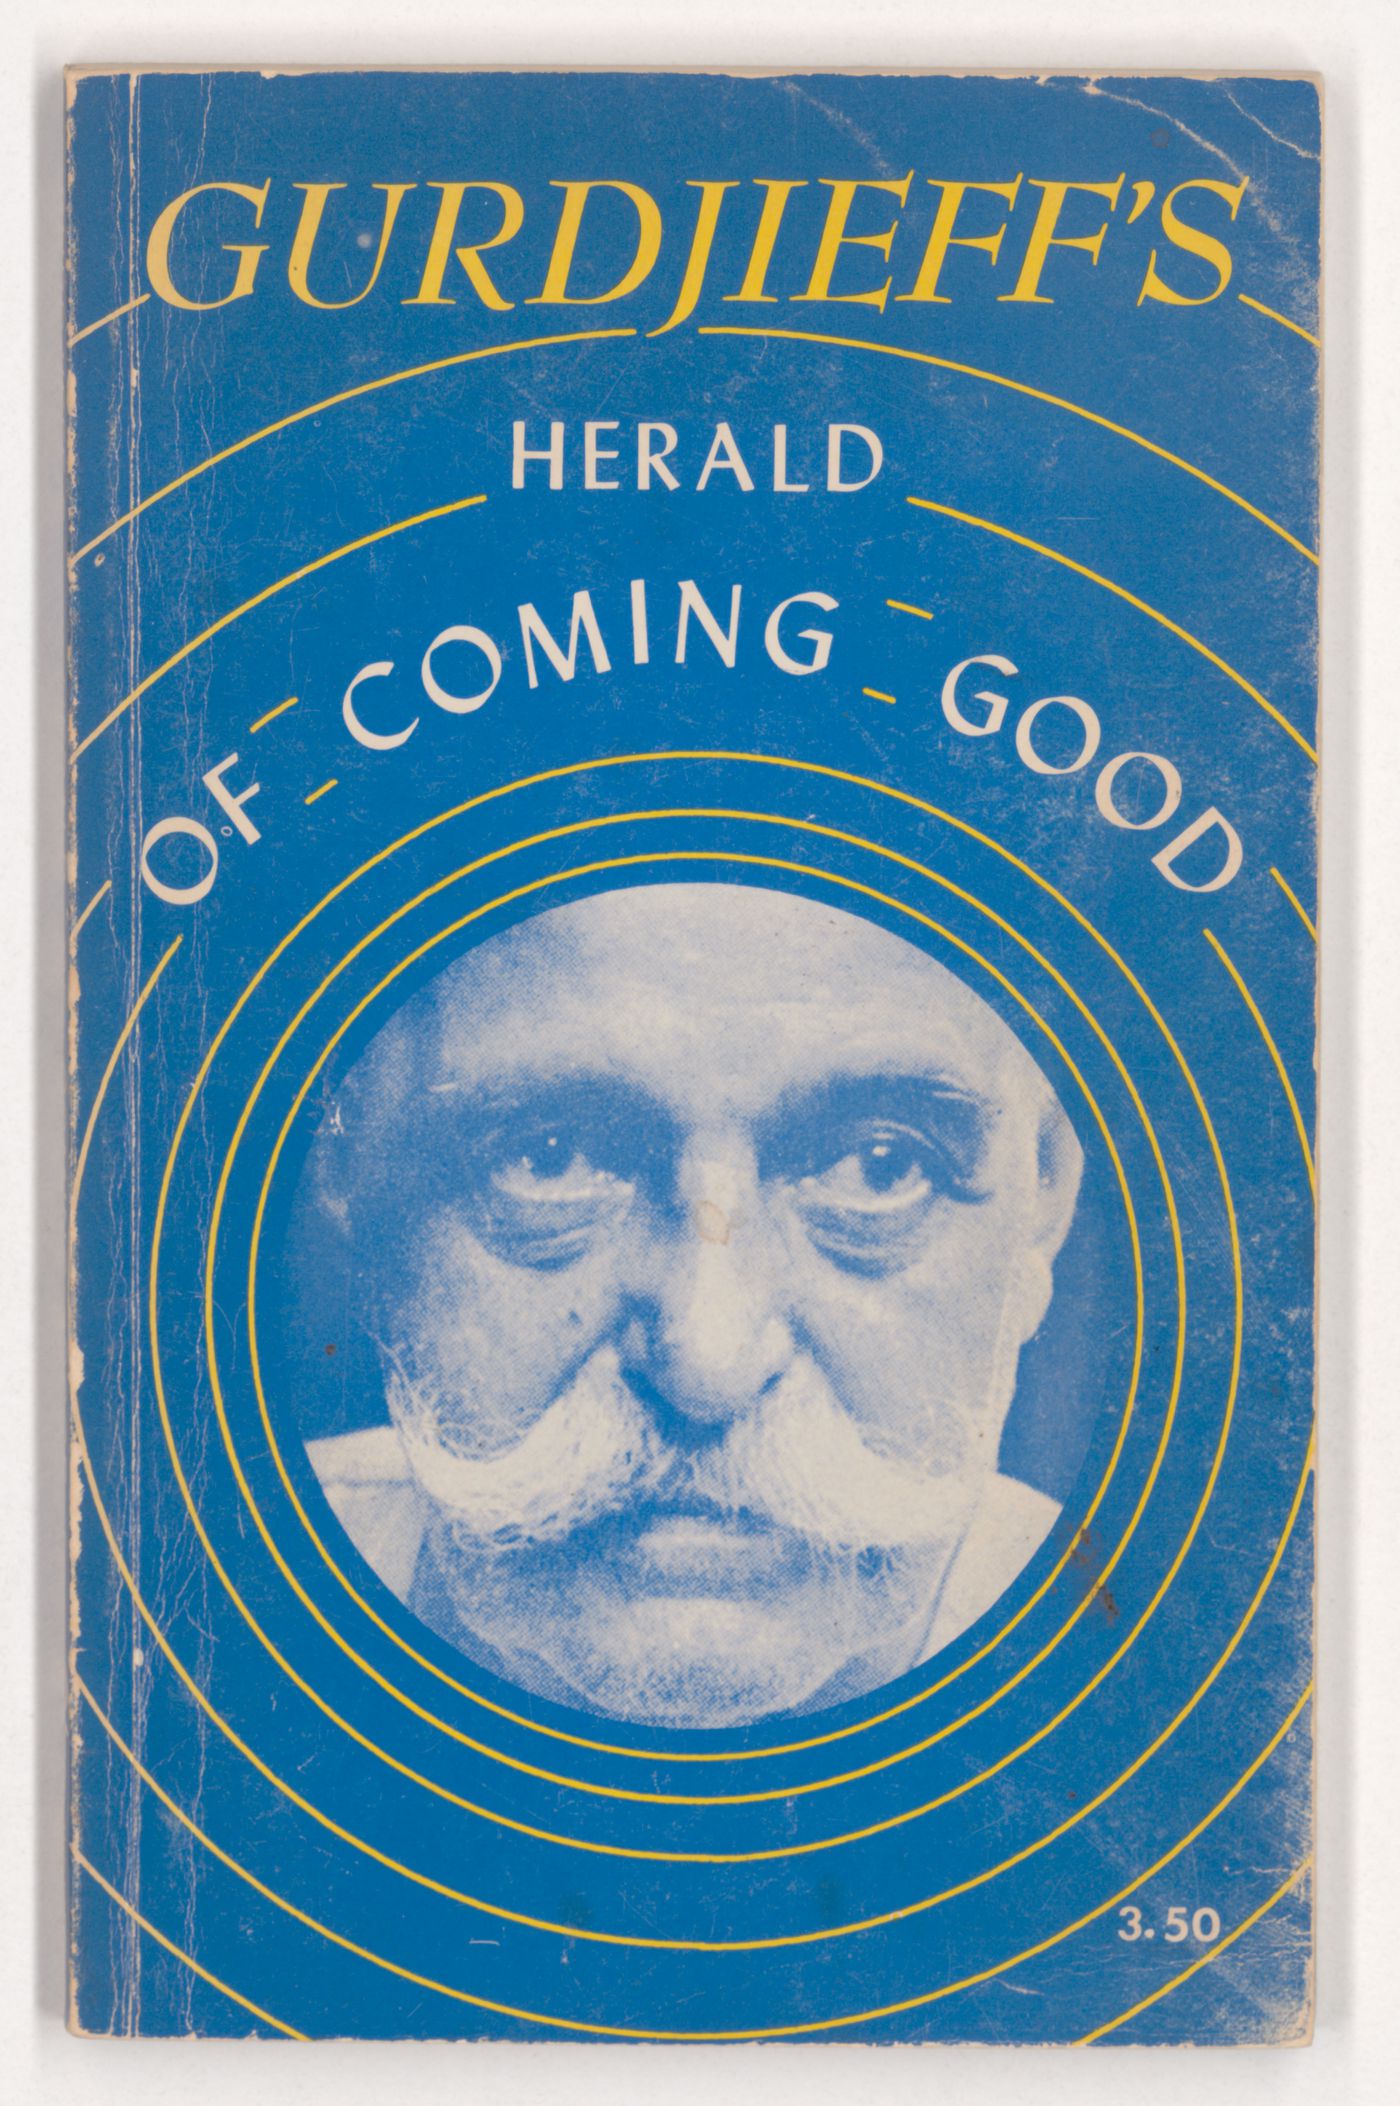 Herald of Coming Good: First Appeal to Contemporary Humanity